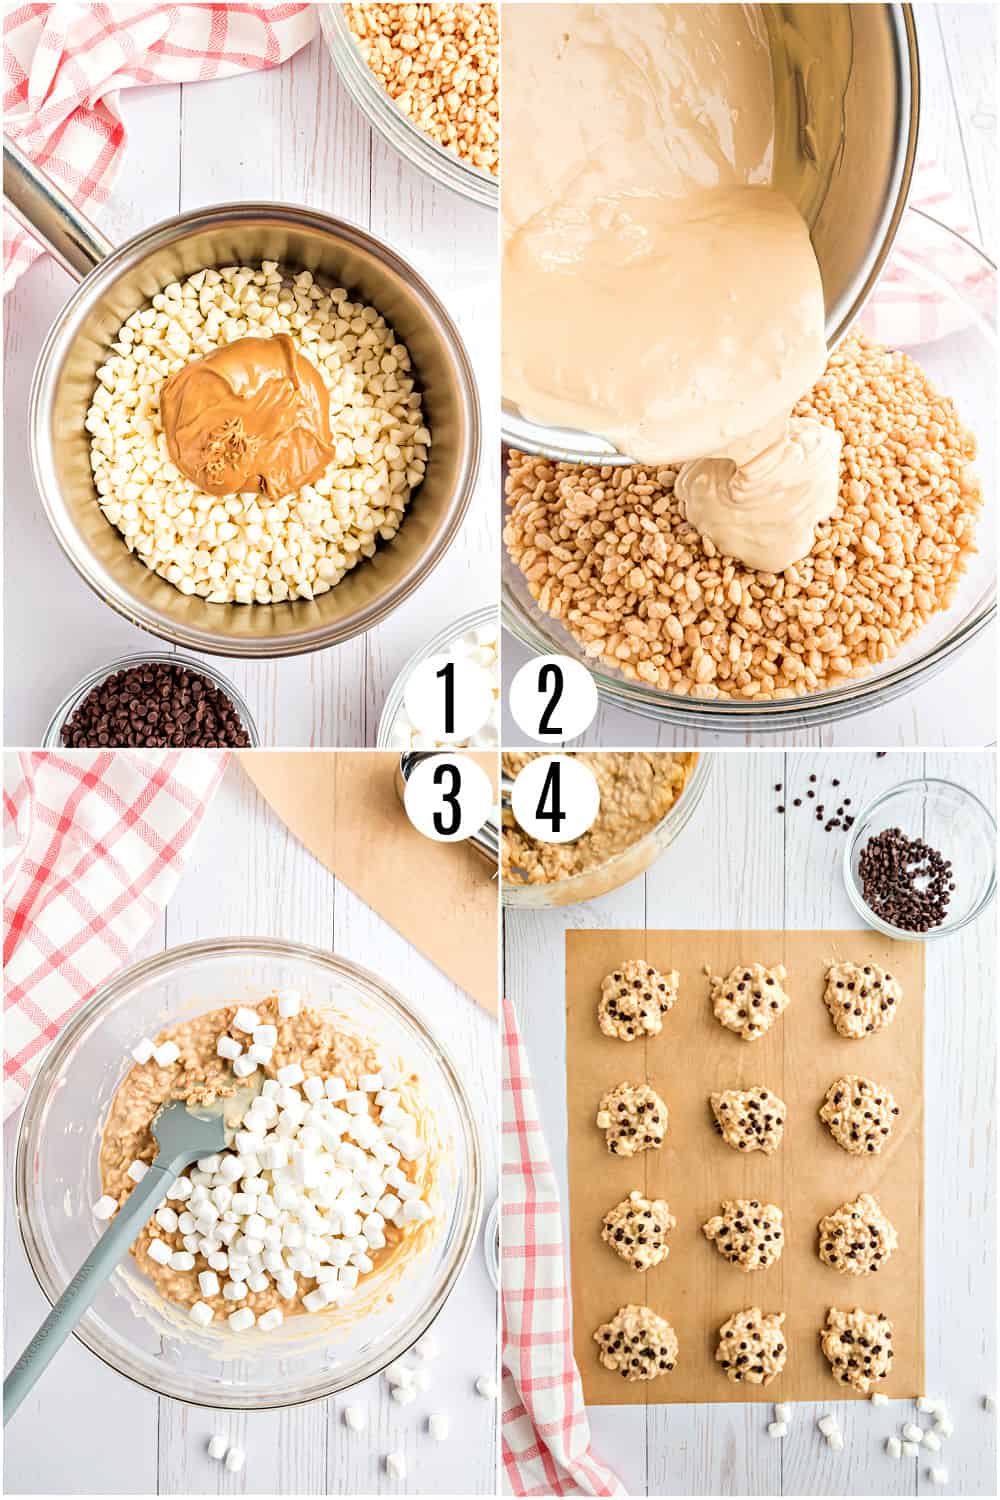 Step by step photos showing how to make avalanche cookies.